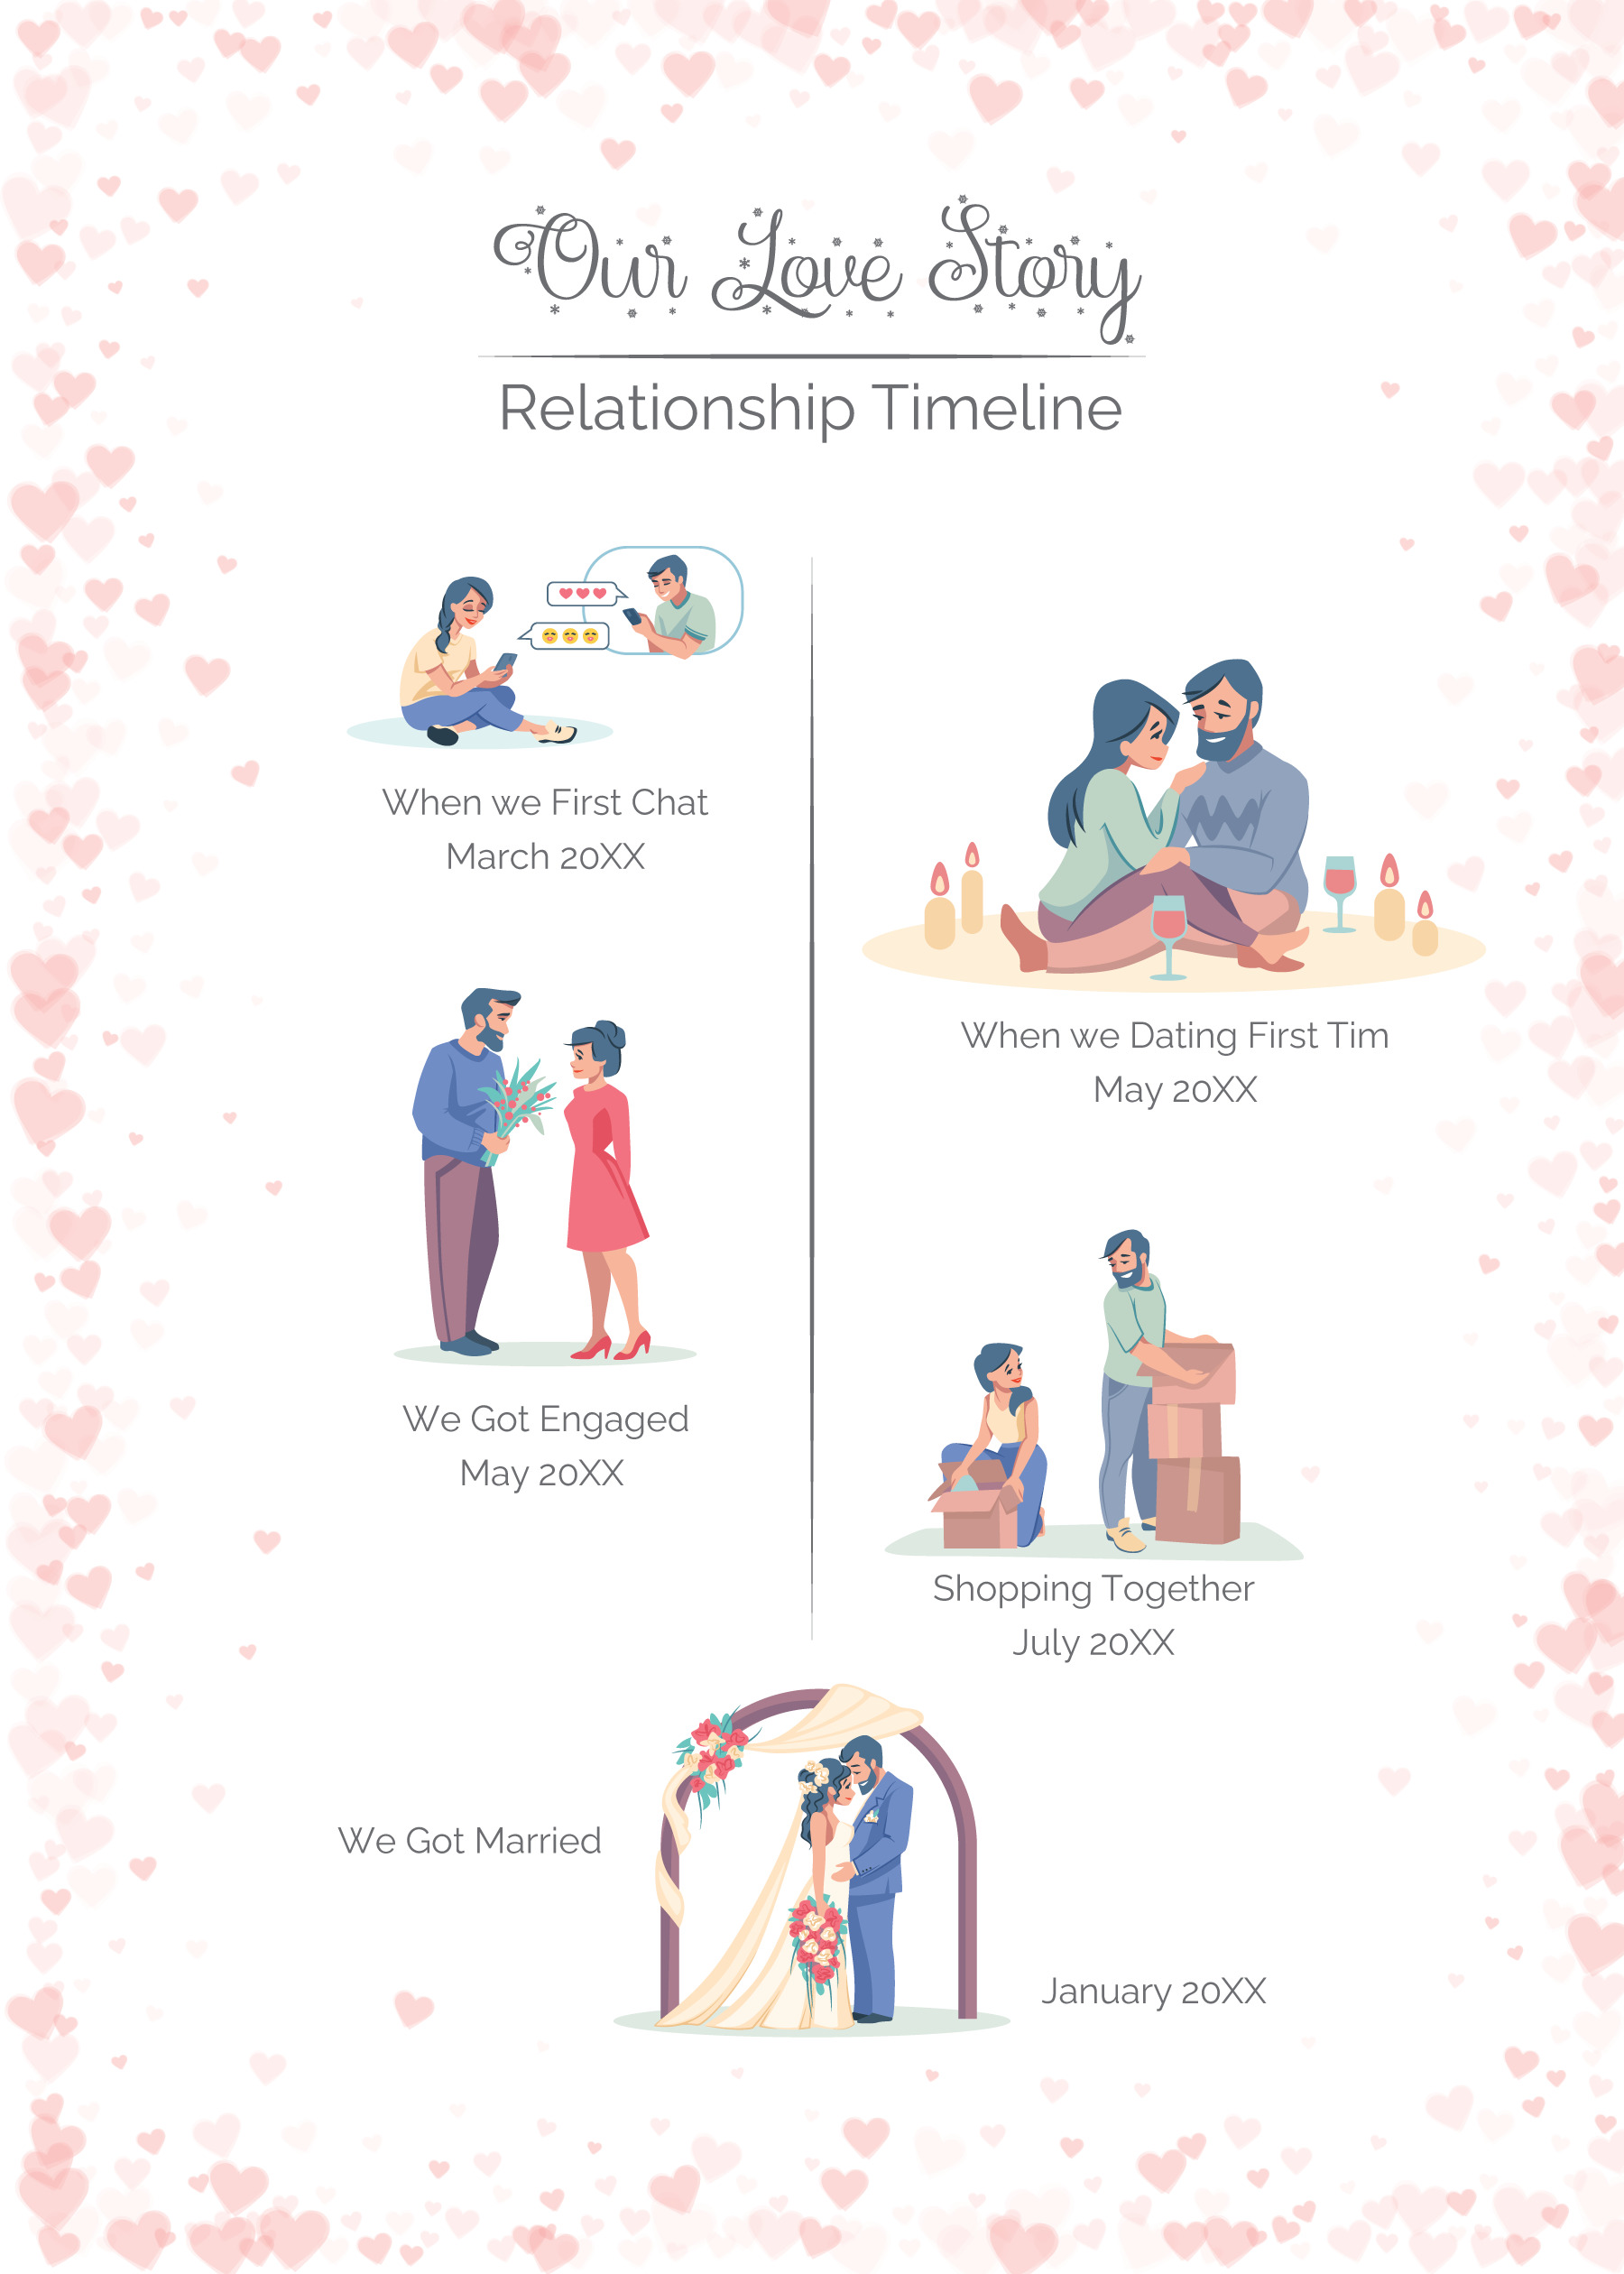 Personalized Relationship Timeline Template - Editable - Word